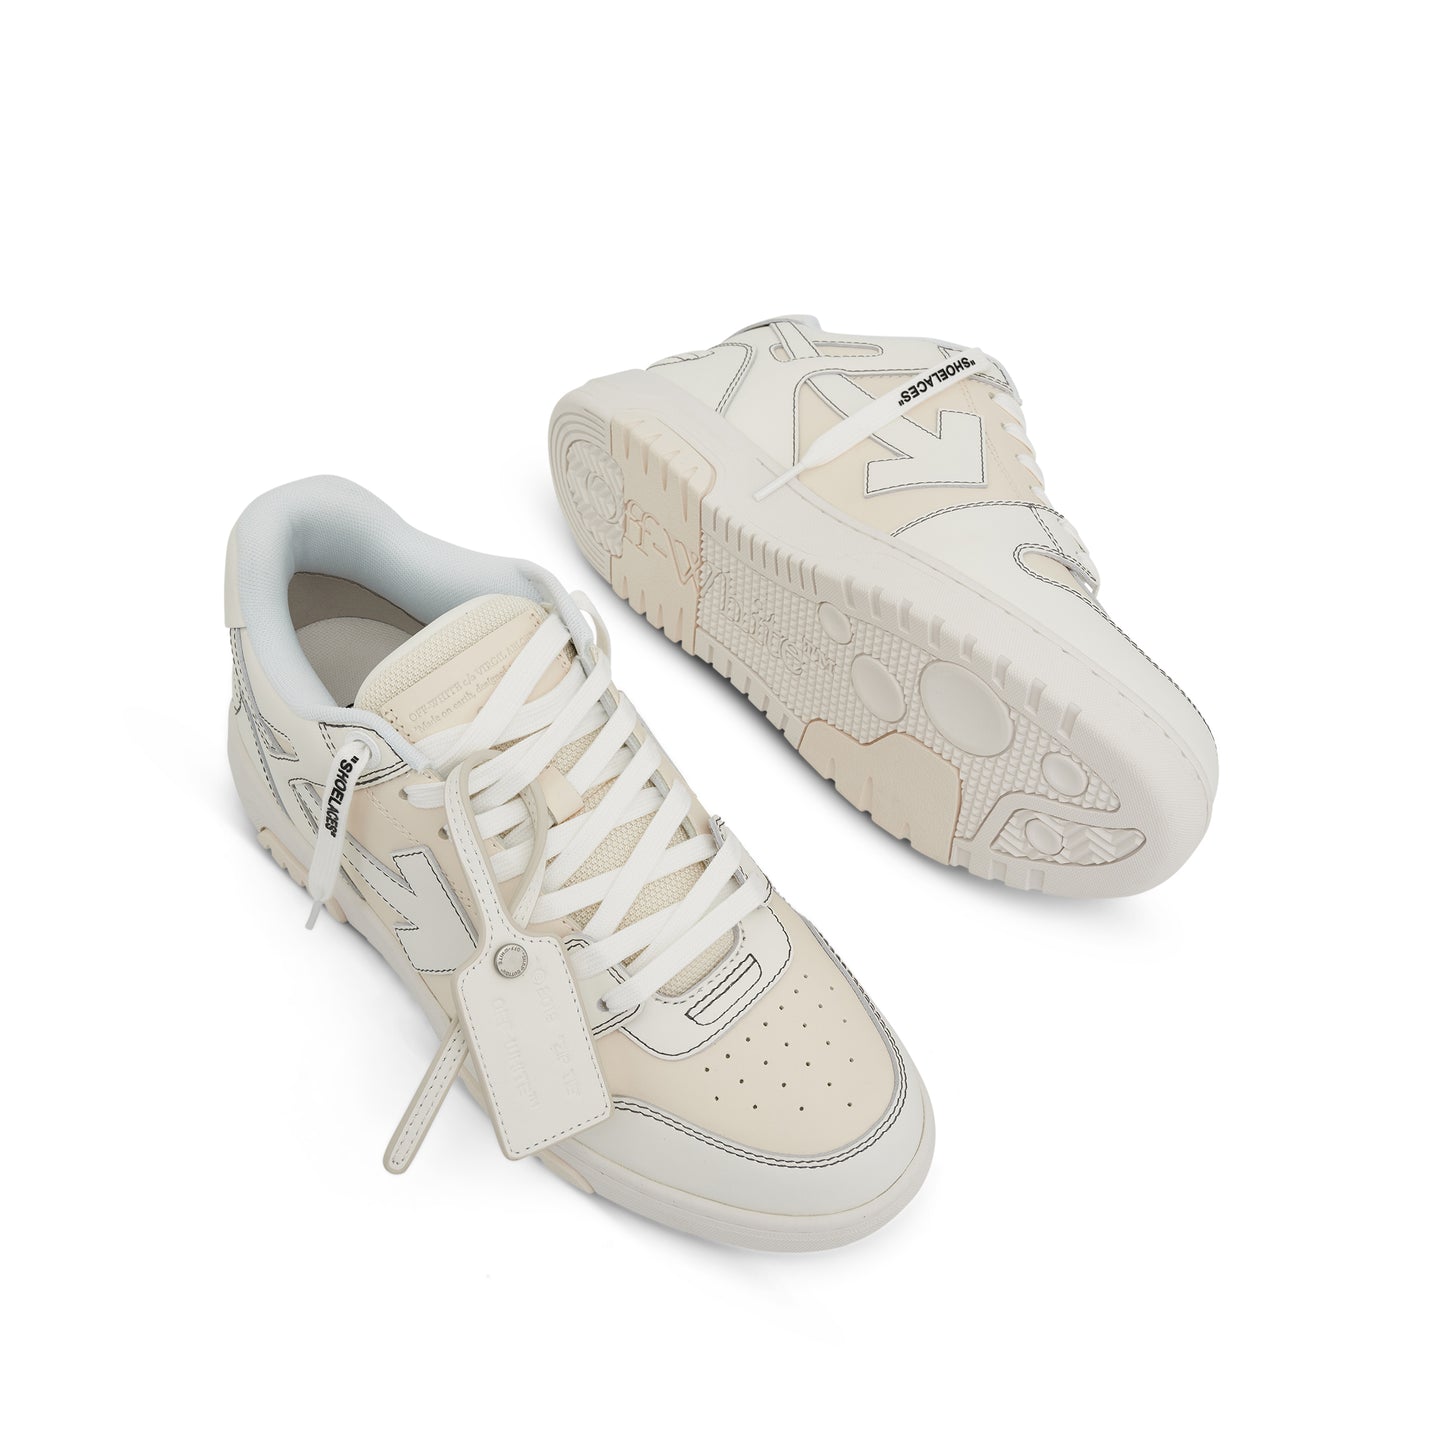 Out of Office Calf Leather Sneaker in Cream/White